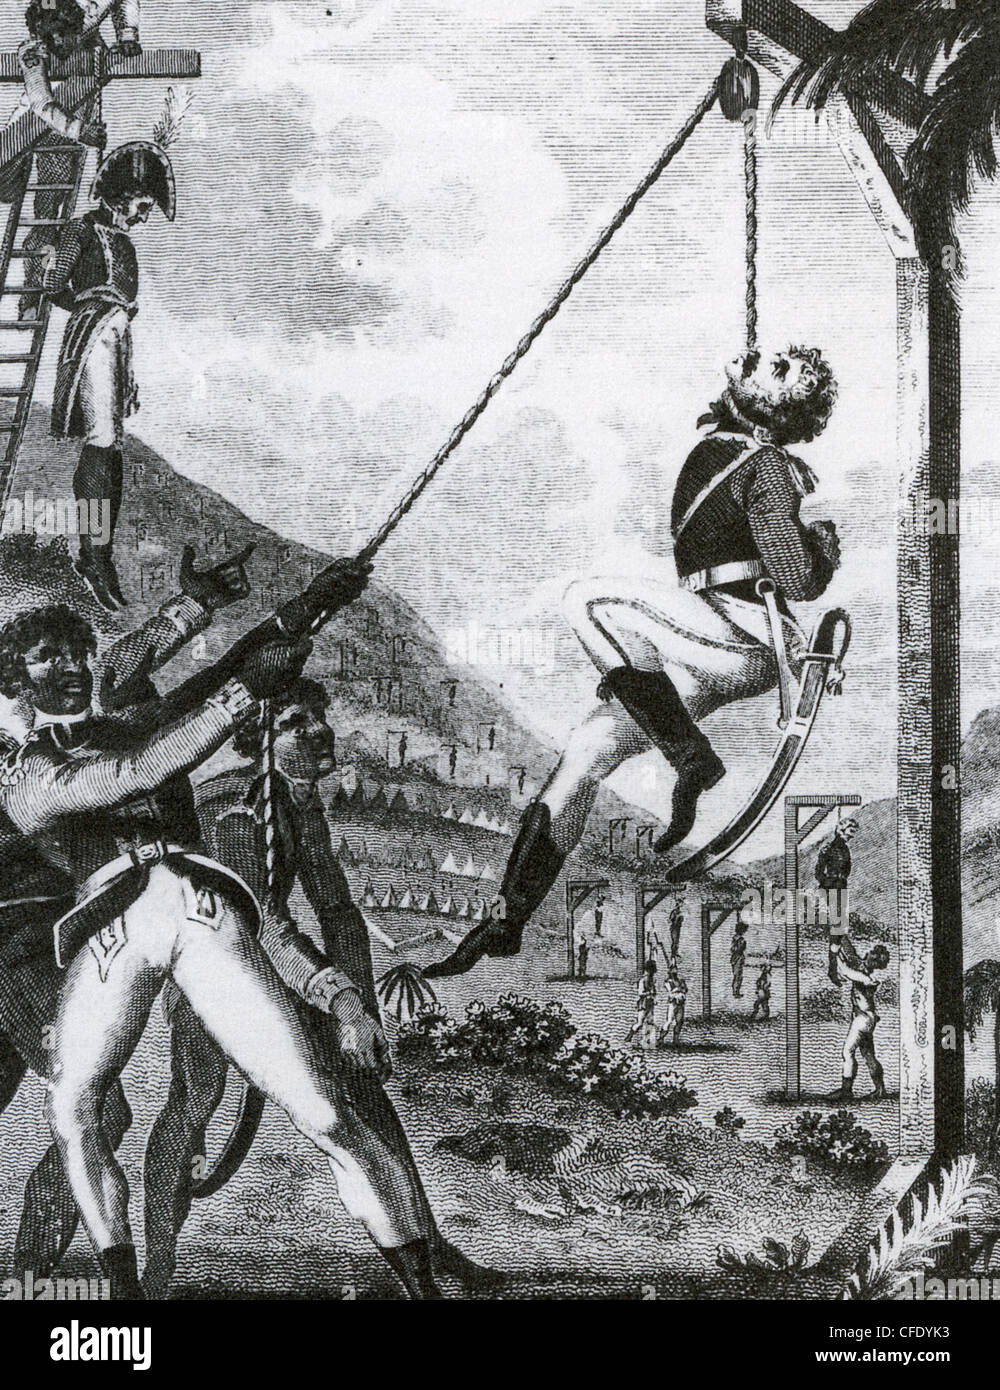 SAINT DOMINGUE  Former slaves take their revenge on French troops sent to re-impose slavery in 1802 Stock Photo